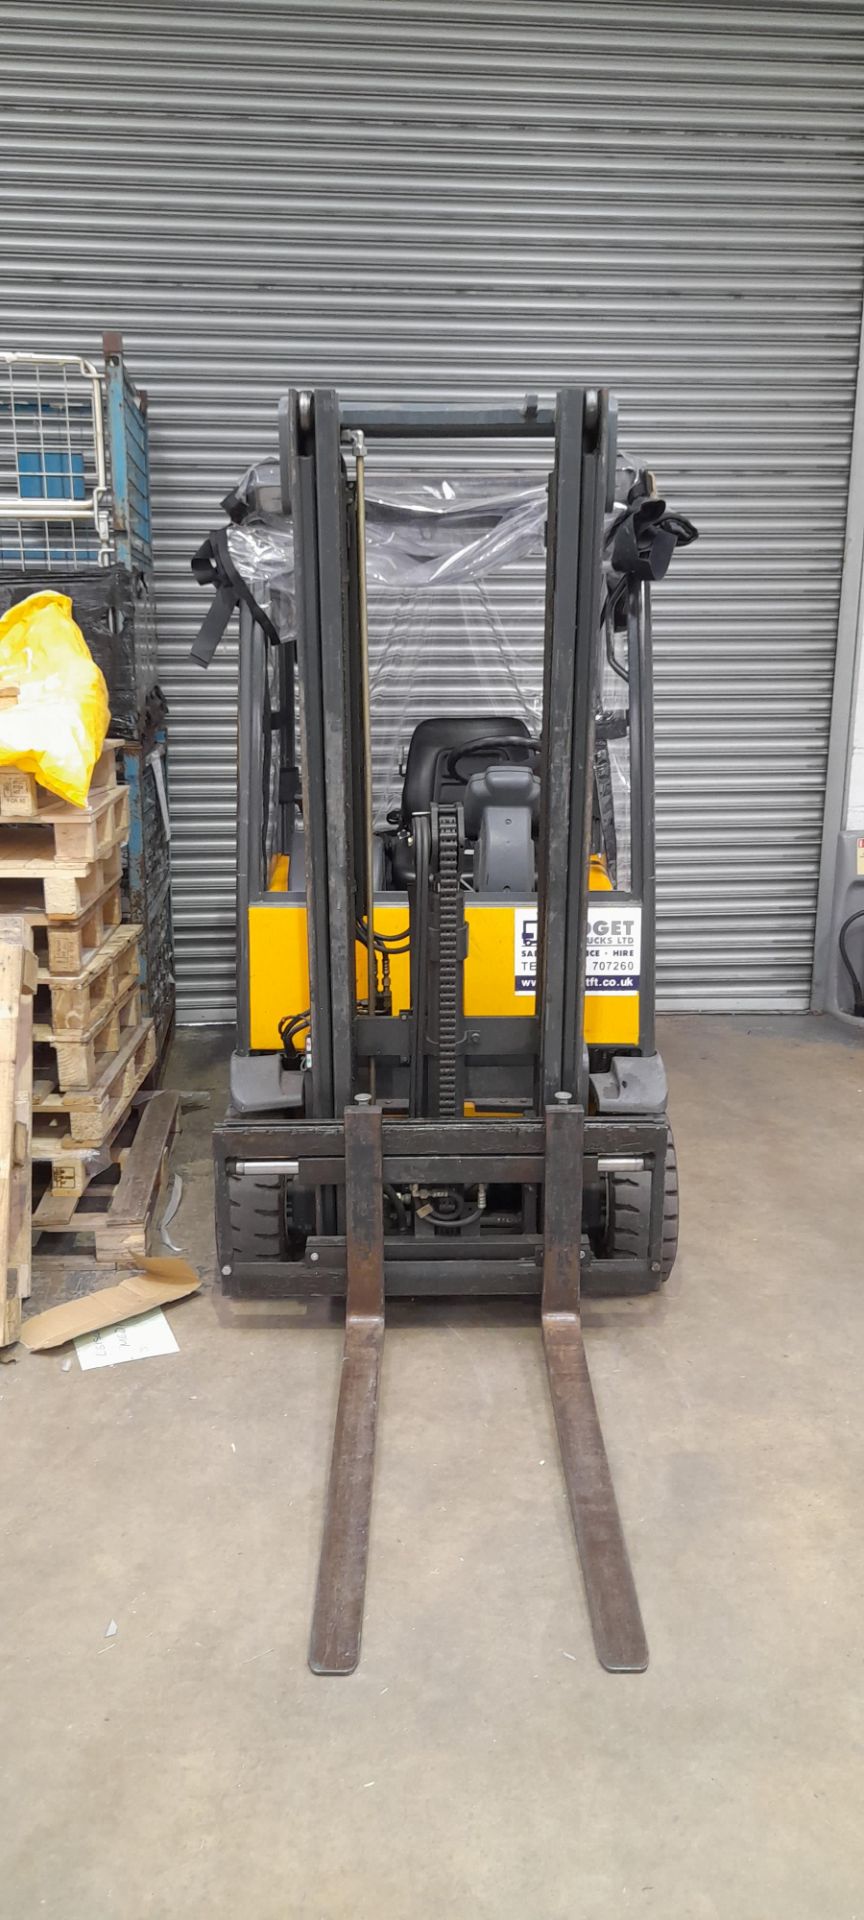 Jungheinrich, EFG 215n, 1,500kg electric forklift truck, 7702 hours, year 2004, S/N: FN315226 with - Image 3 of 15